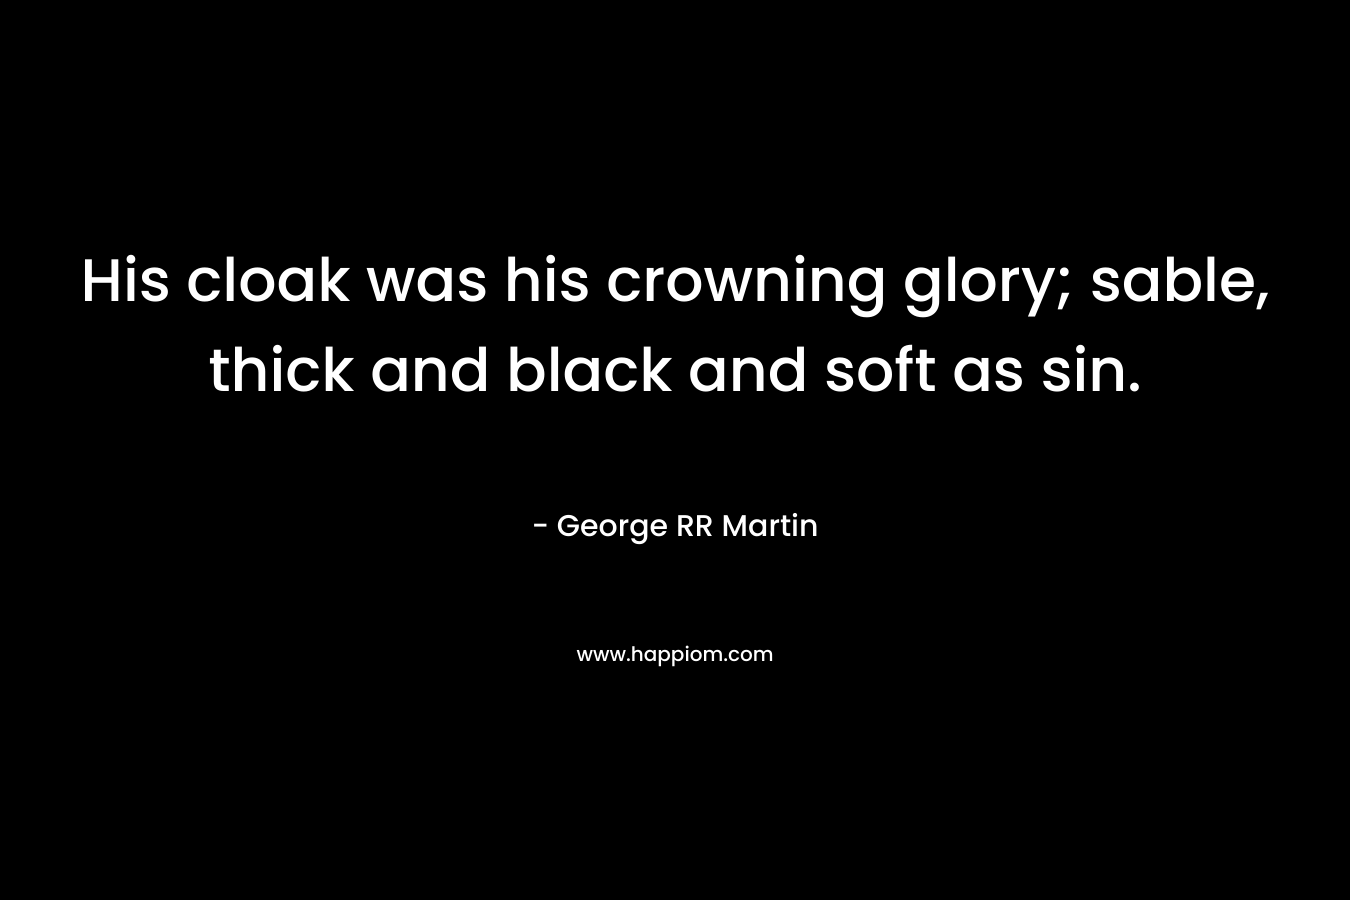 His cloak was his crowning glory; sable, thick and black and soft as sin. – George RR Martin